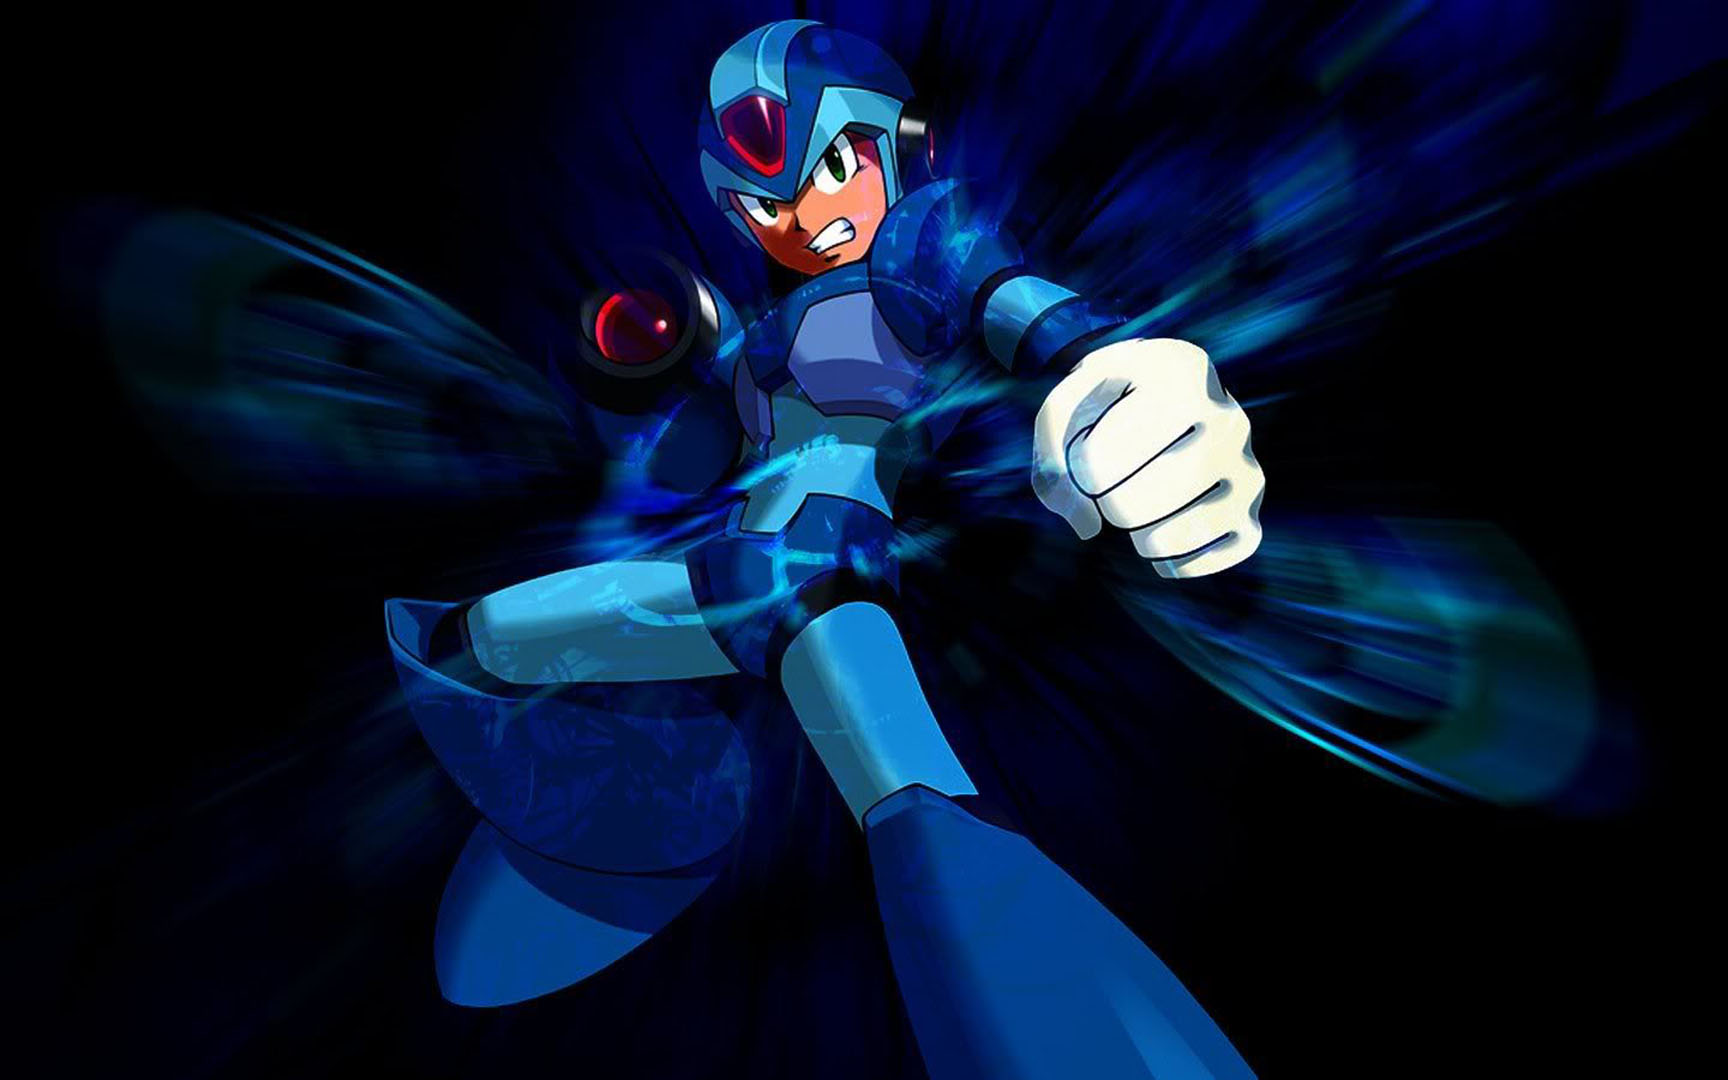 White Glove Action Games Wallpaper Image Featuring Megaman